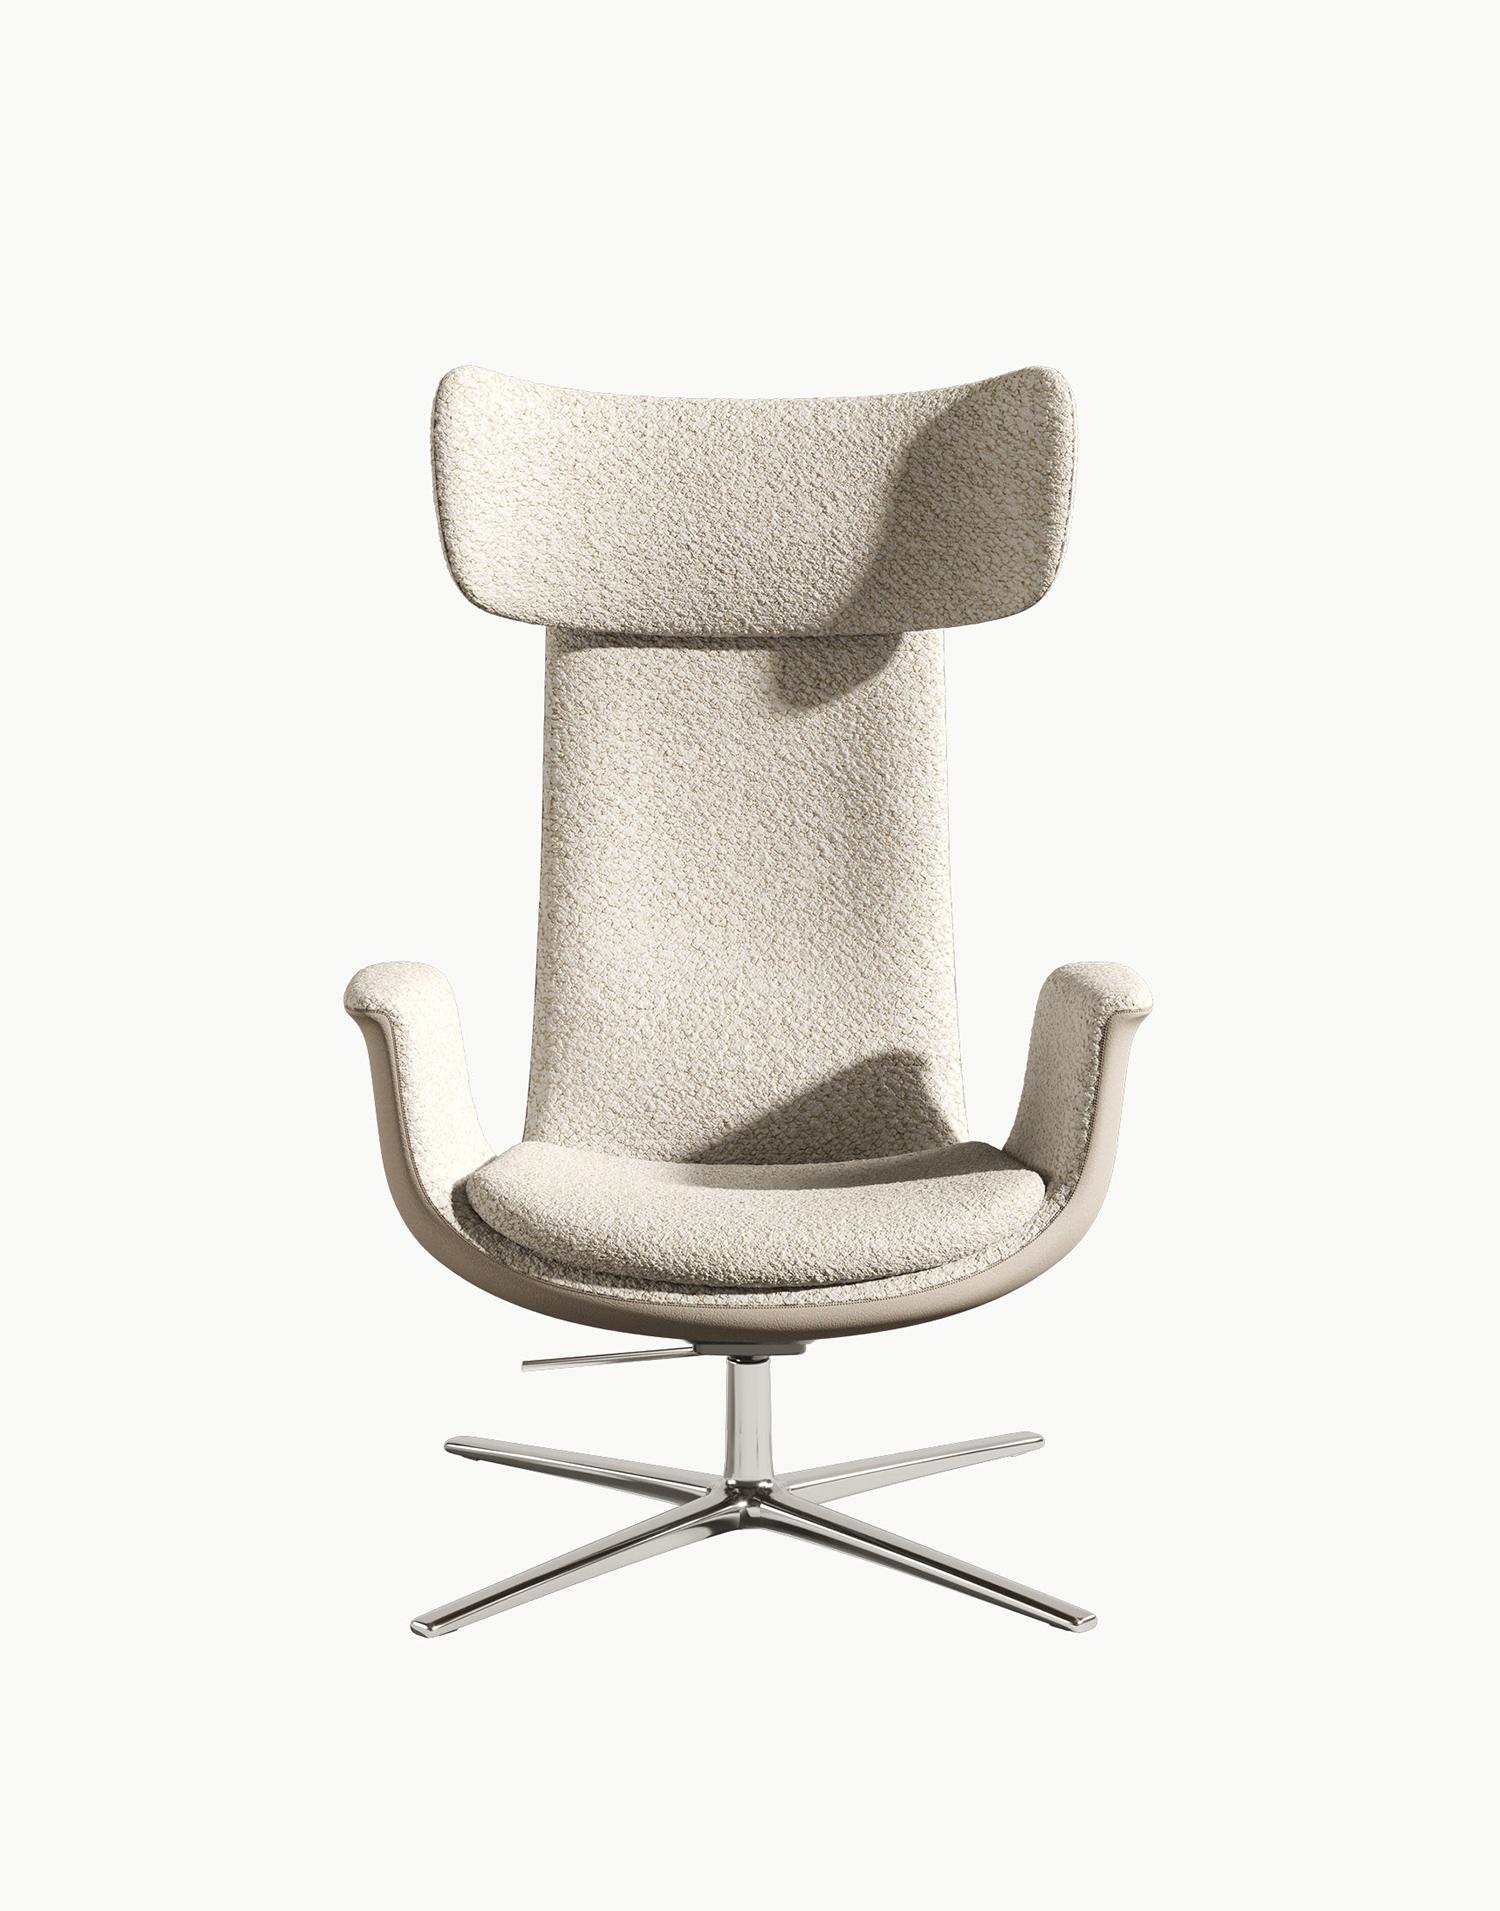 Oddysey Light Grey Large Headrest Armchair by Eugeni Quitllet
Dimensions: D 75 x W 81 x H 111 cm.
Materials: Polyurethane foam, steel, felt, leather and fabric.
Other materials available. Please contact us.

A flexible moulded polyurethane